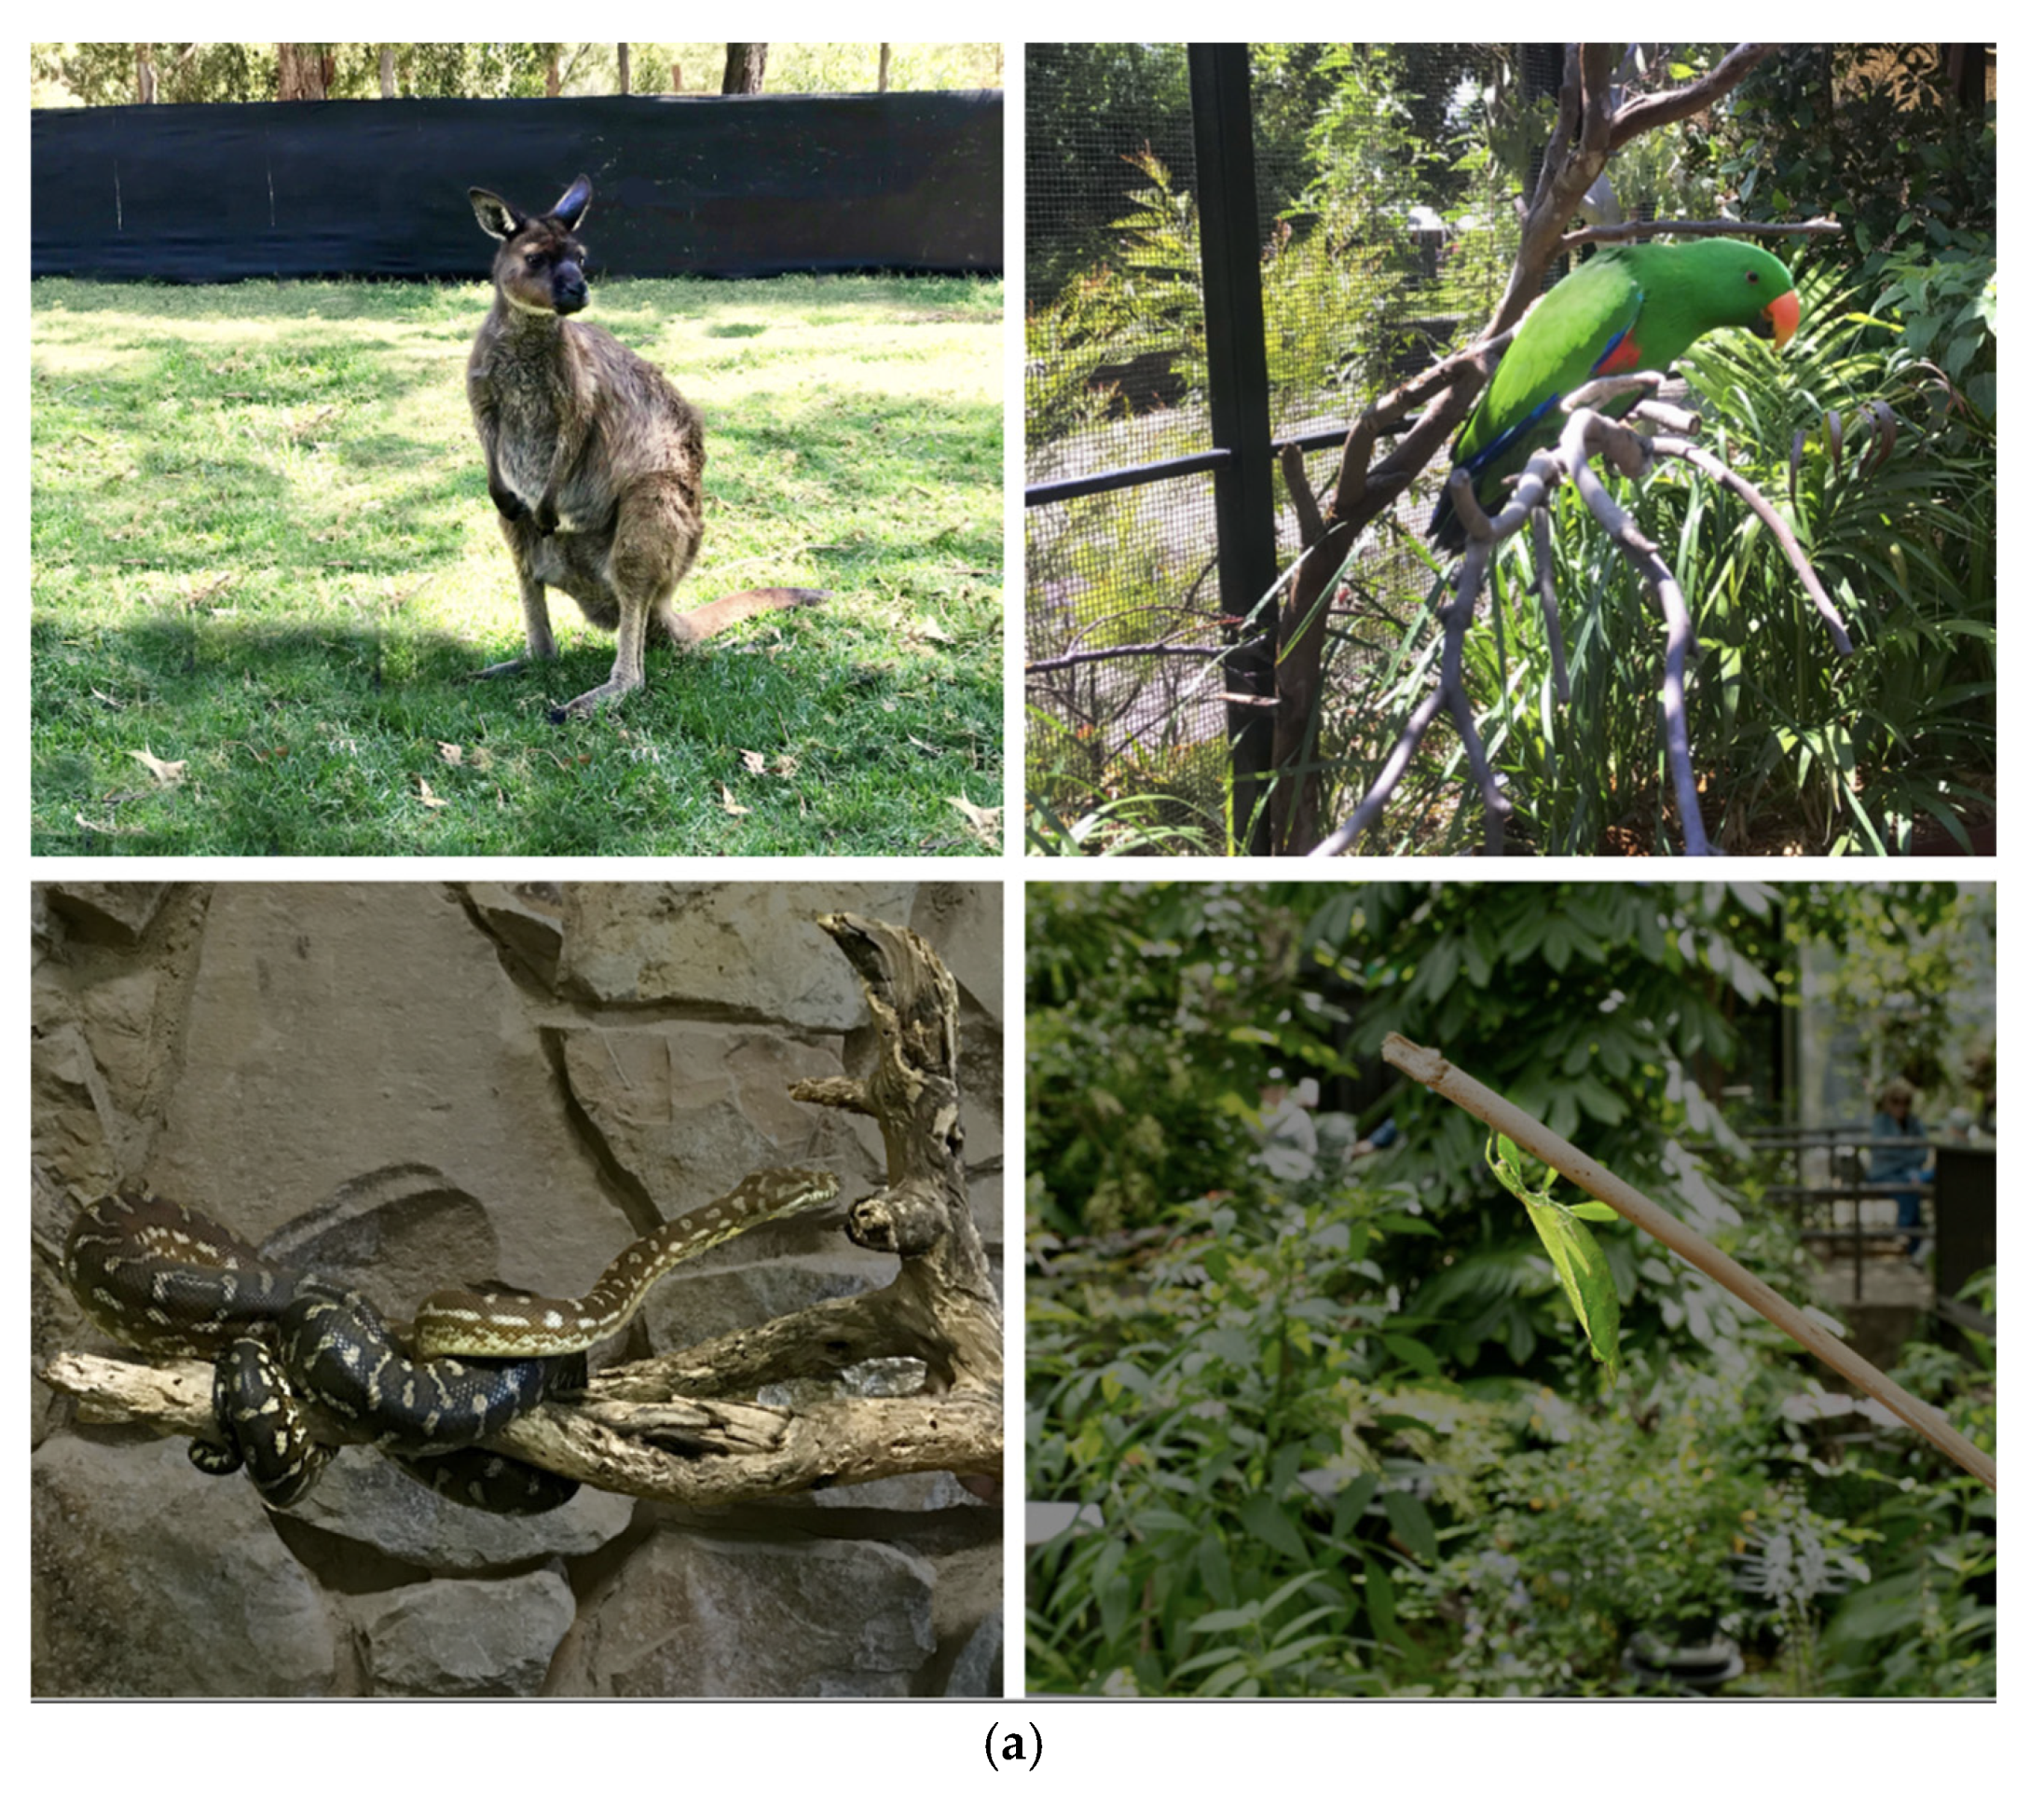 Zoo V Man Xvideo - Animals | Free Full-Text | Human Positioning in Close-Encounter Photographs  and the Effect on Public Perceptions of Zoo Animals